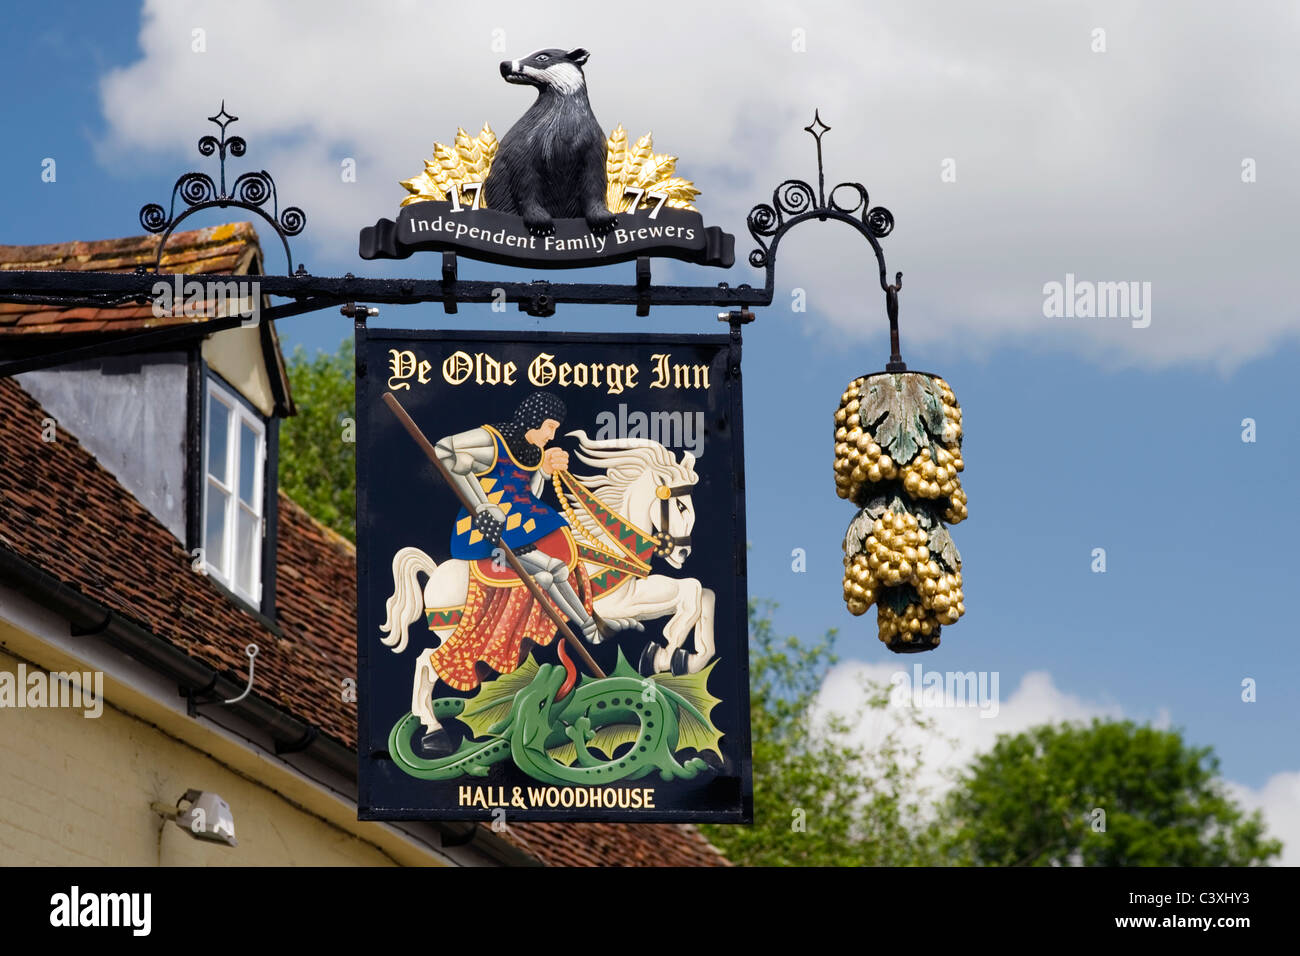 ornate traditional pub sign in rural english village Stock Photo